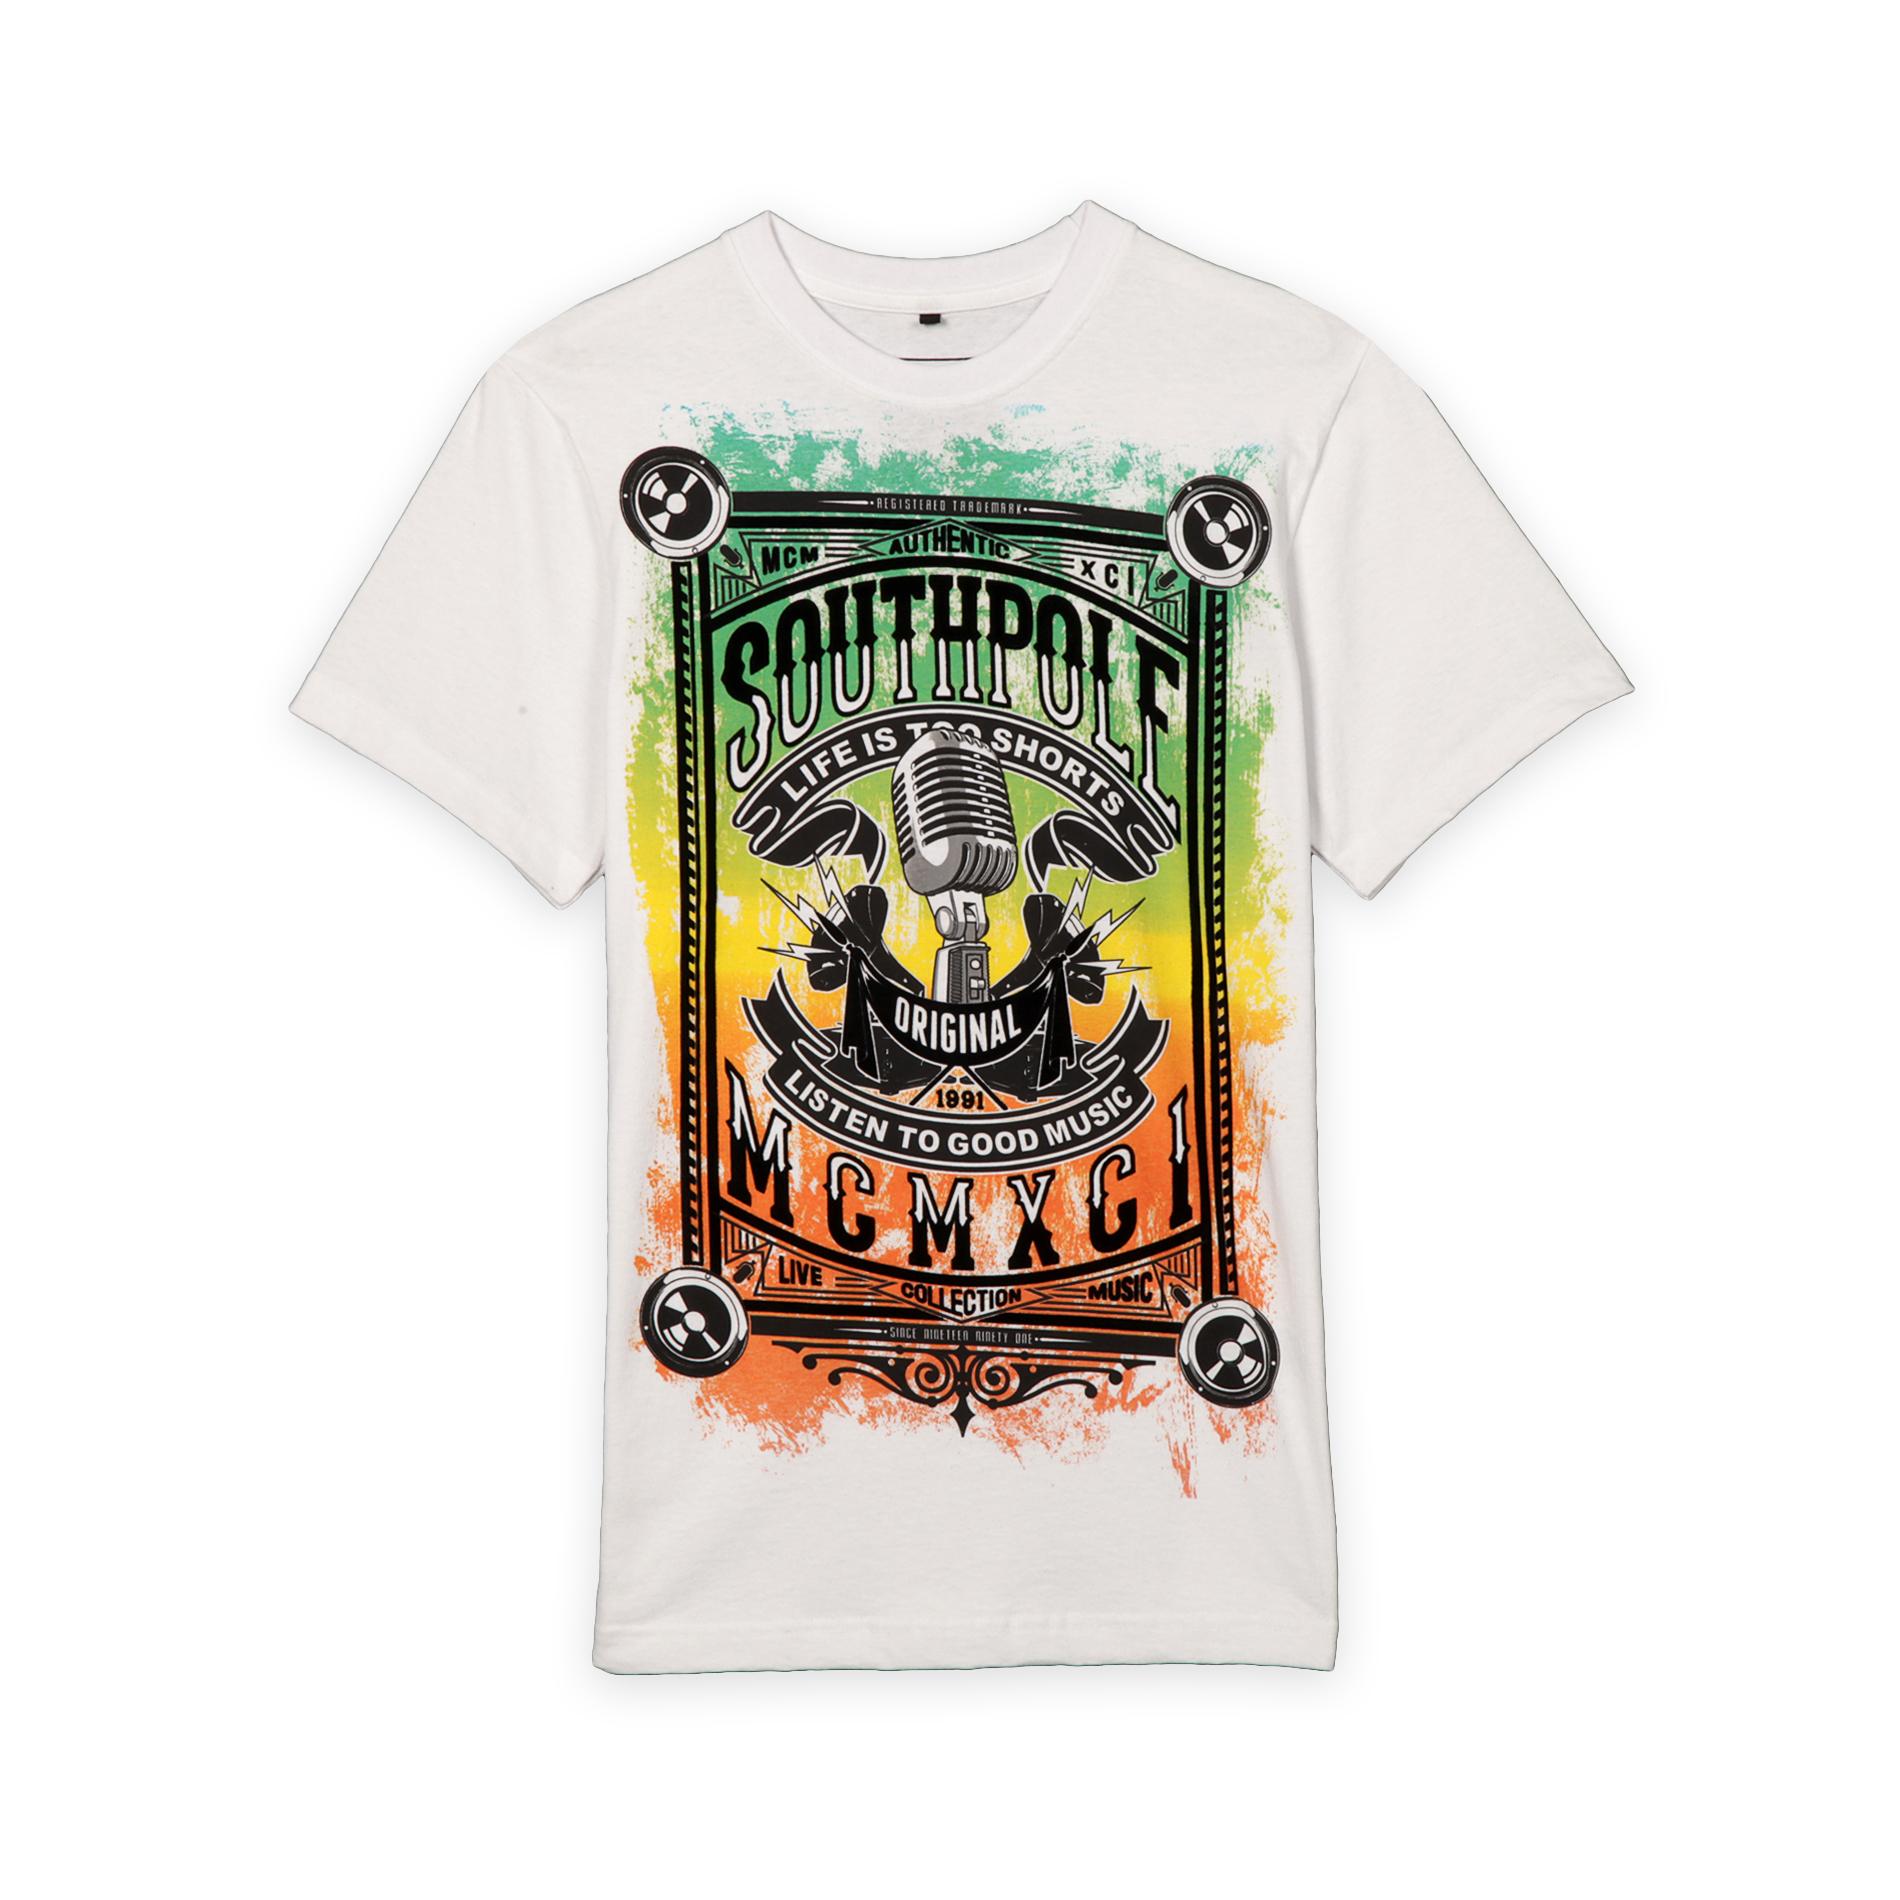 Southpole Young Men's Graphic T-Shirt - Good Music